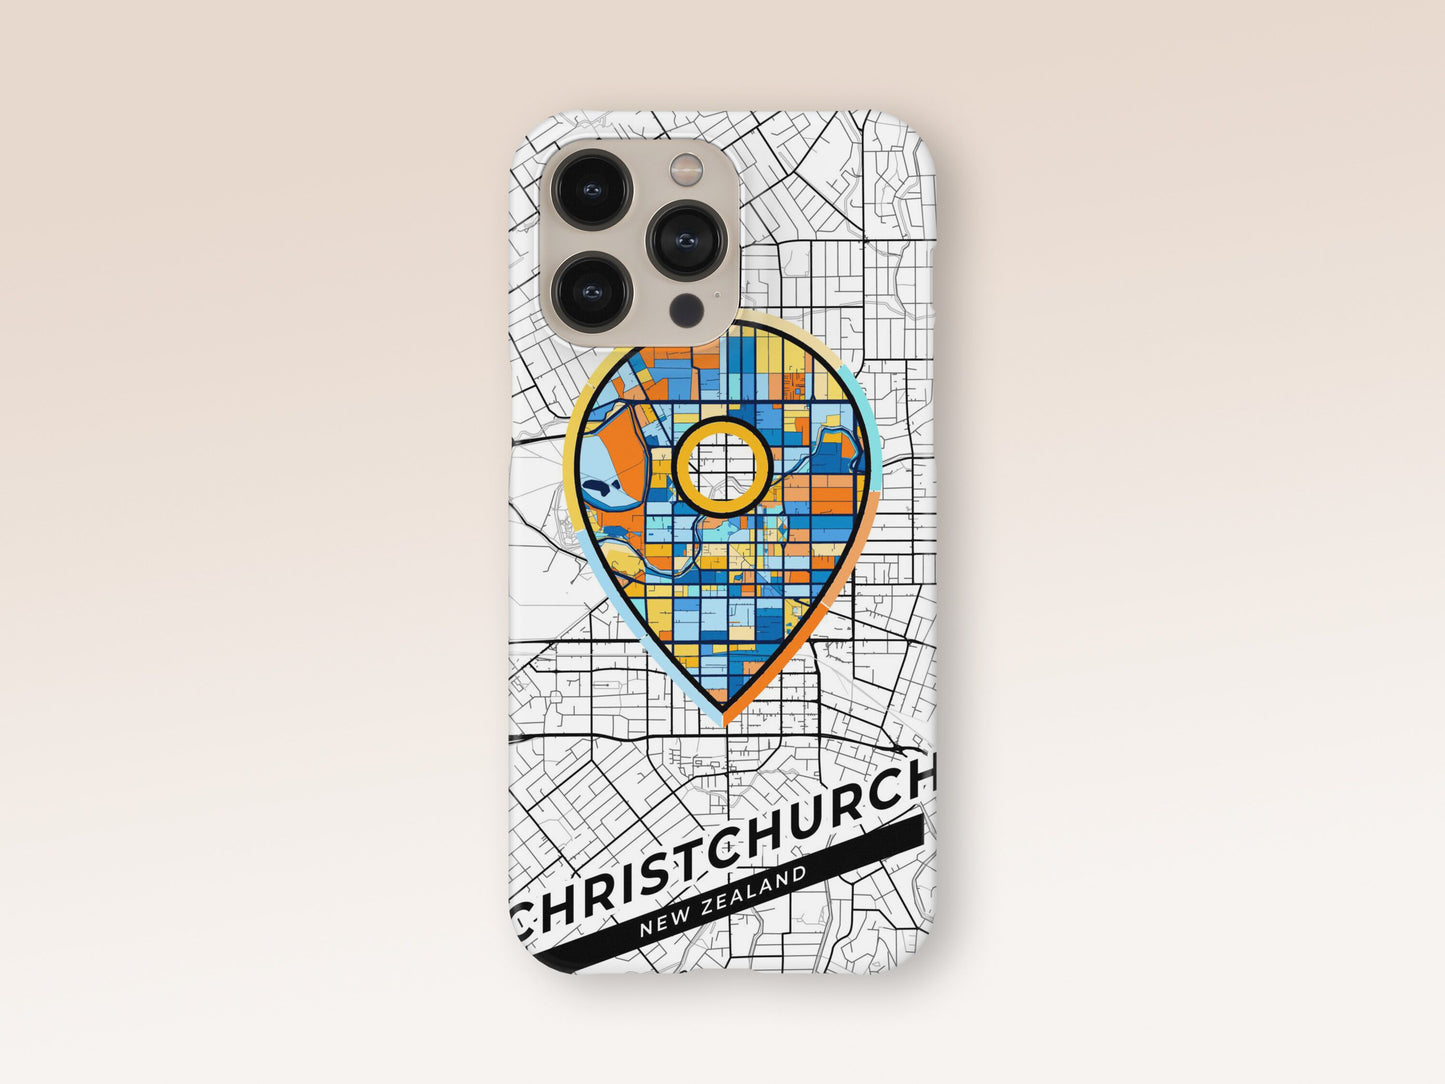 Christchurch New Zealand slim phone case with colorful icon. Birthday, wedding or housewarming gift. Couple match cases. 1